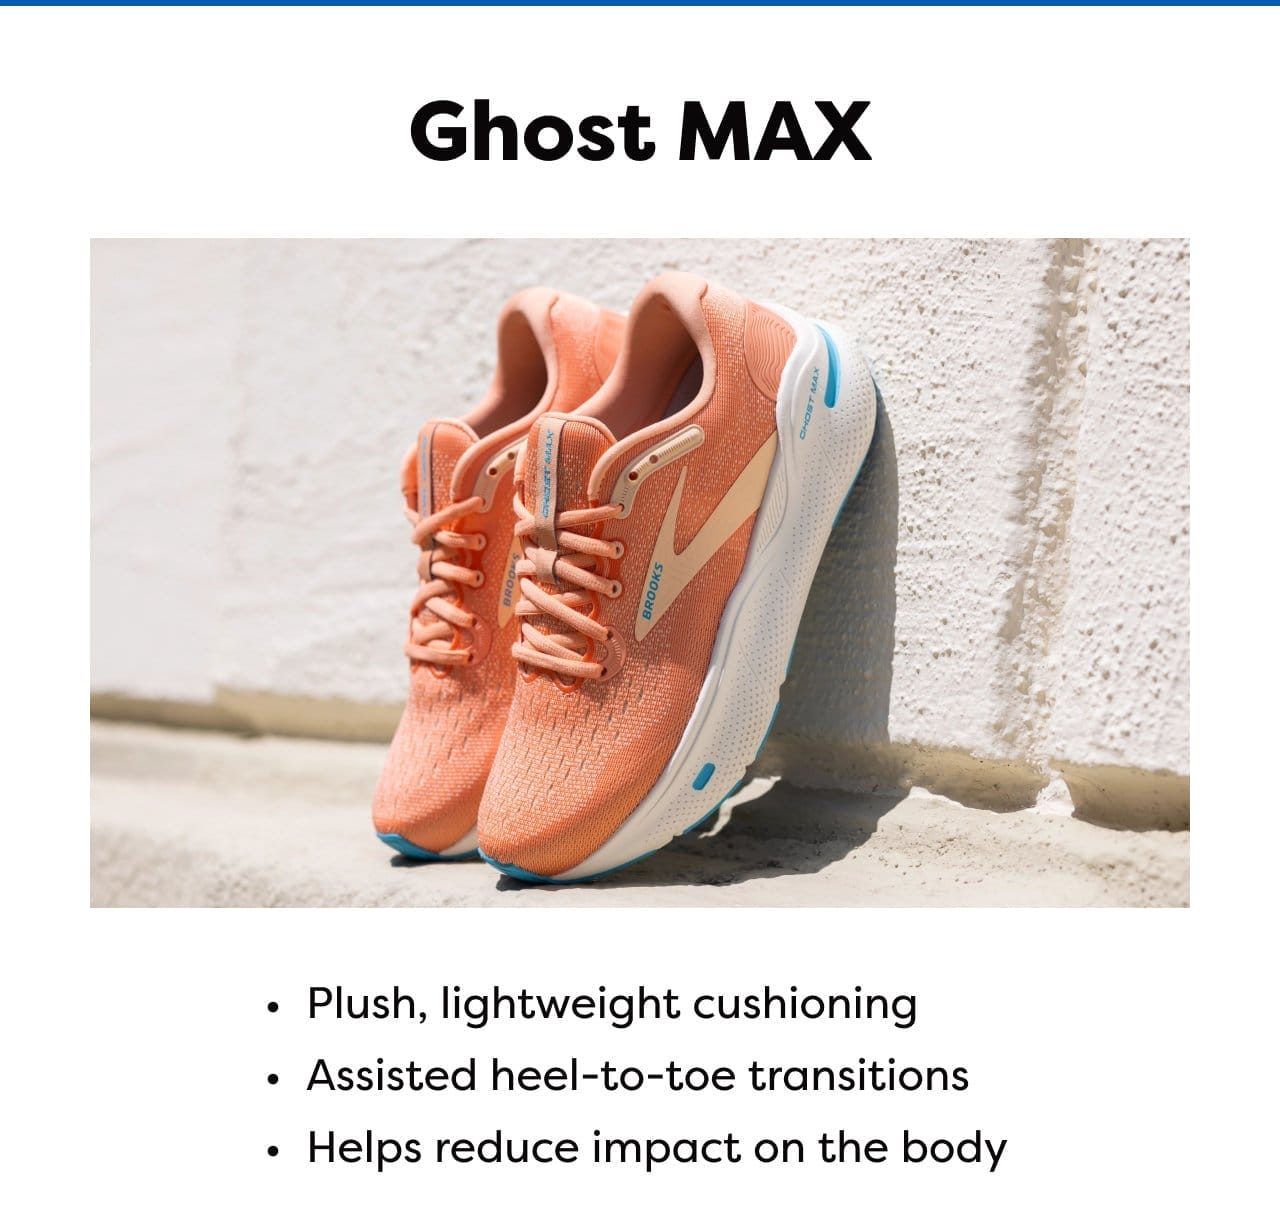 Ghost MAX - Plush, lightweight cushioning - Assisted heel-to-toe transitions - Helps reduce impact on the body